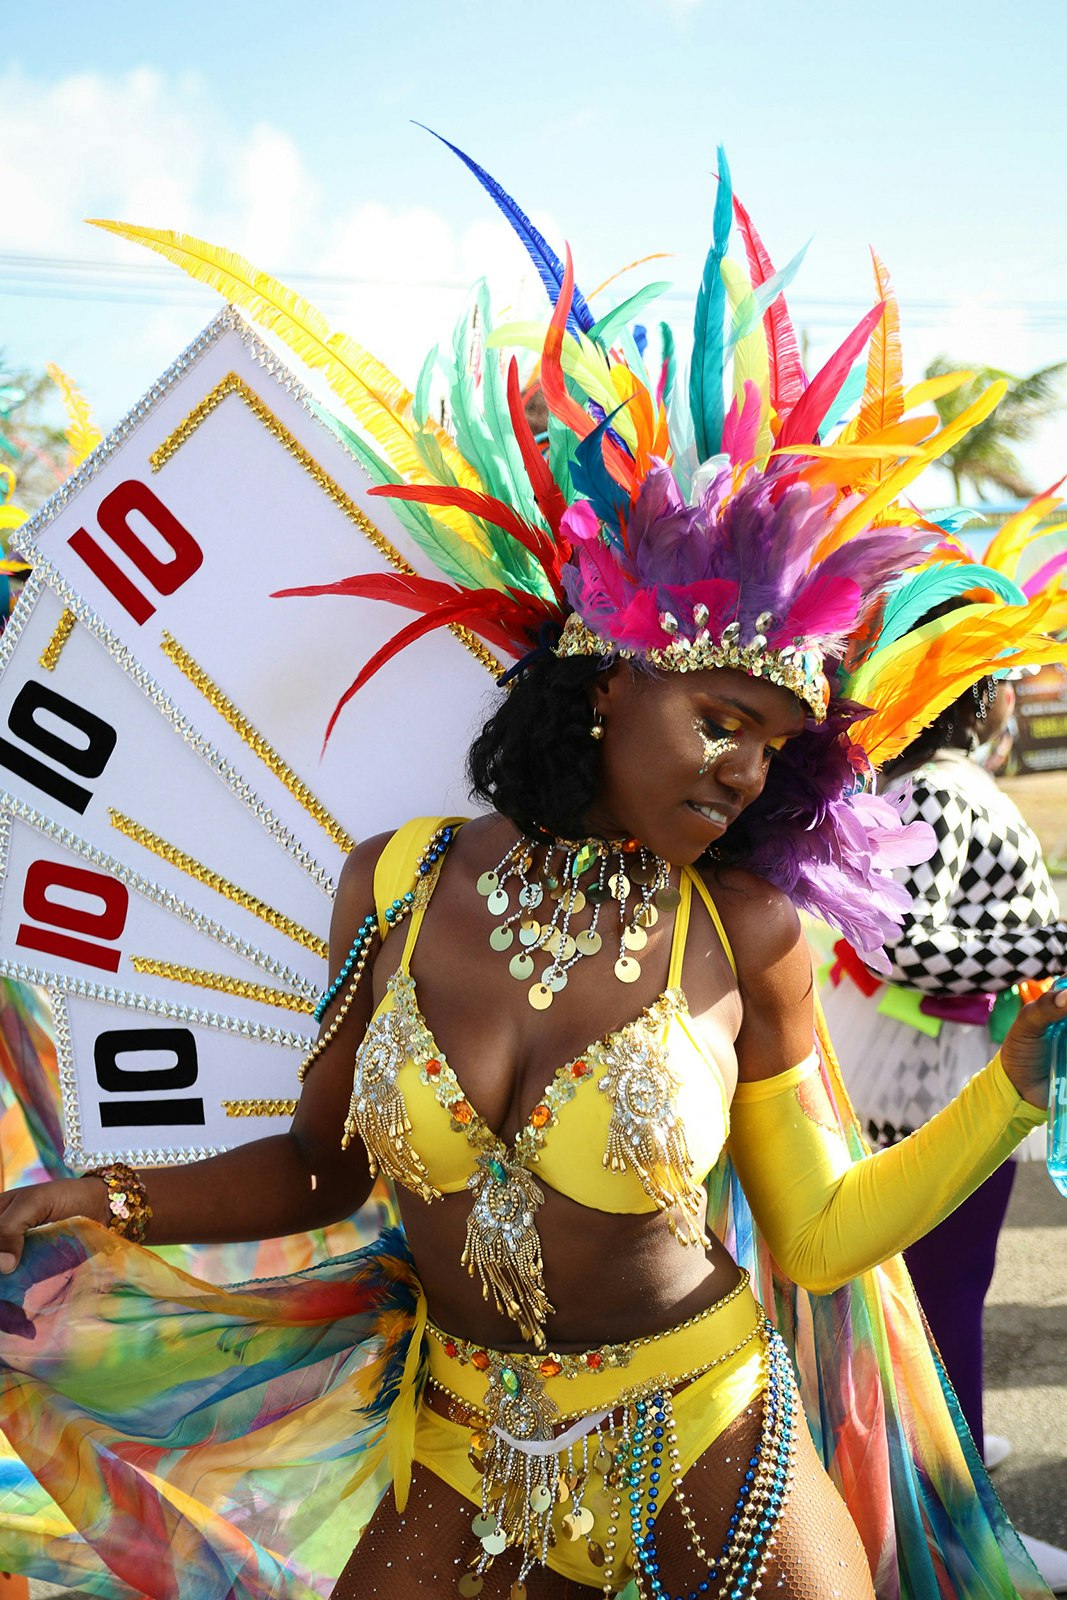 A woman wearing a yellow bikini and a multicolored headdress with playing cards attached as "wings" dances at Anguilla Carnival